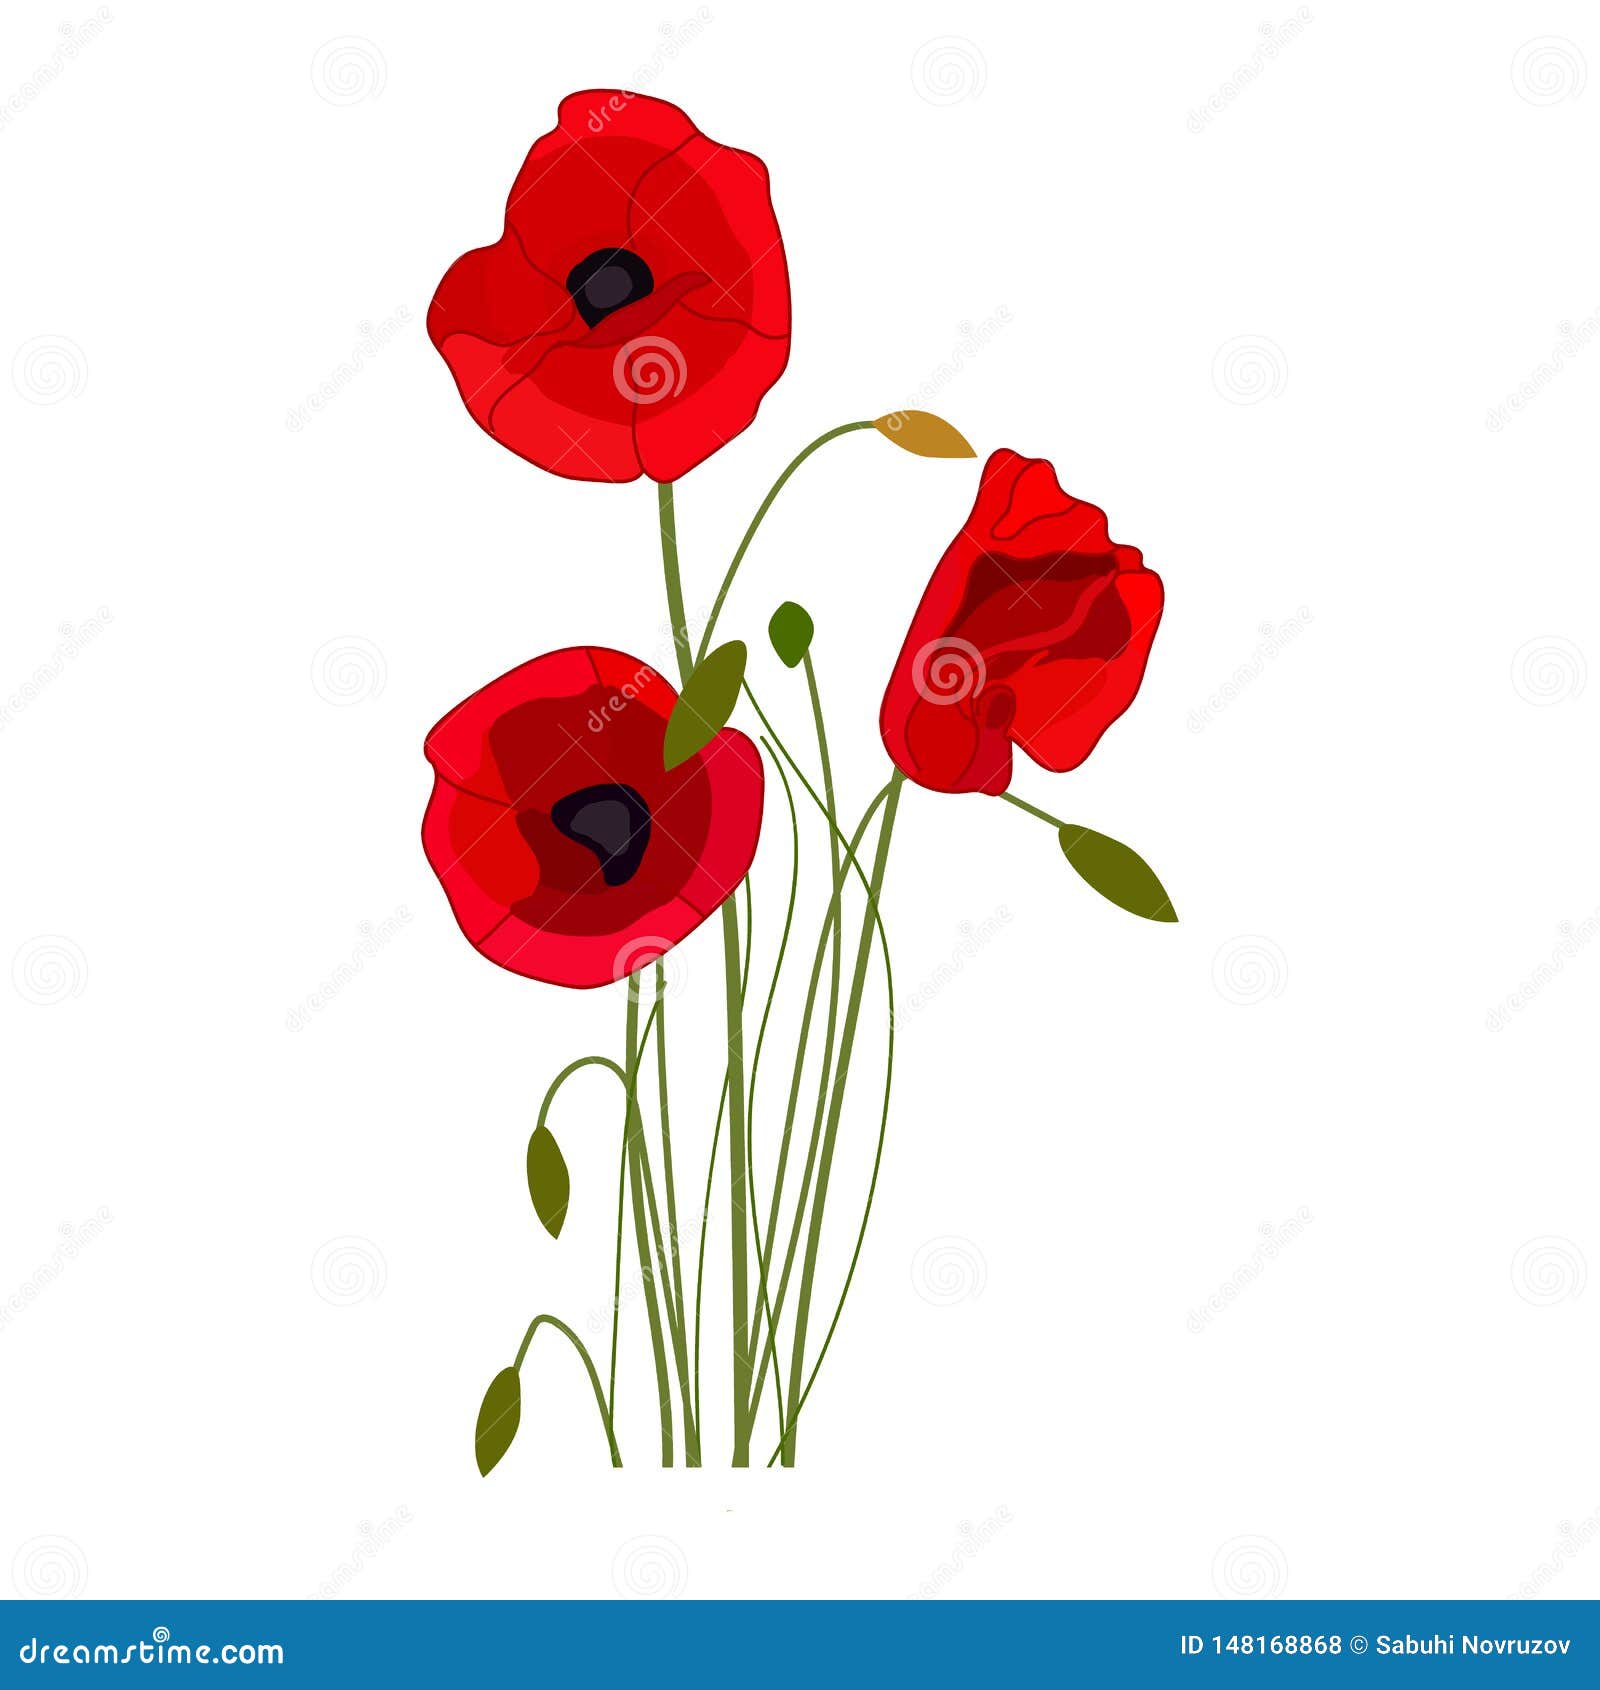 Poppies Vector Icon on a White Background. Flower Illustration Isolated ...